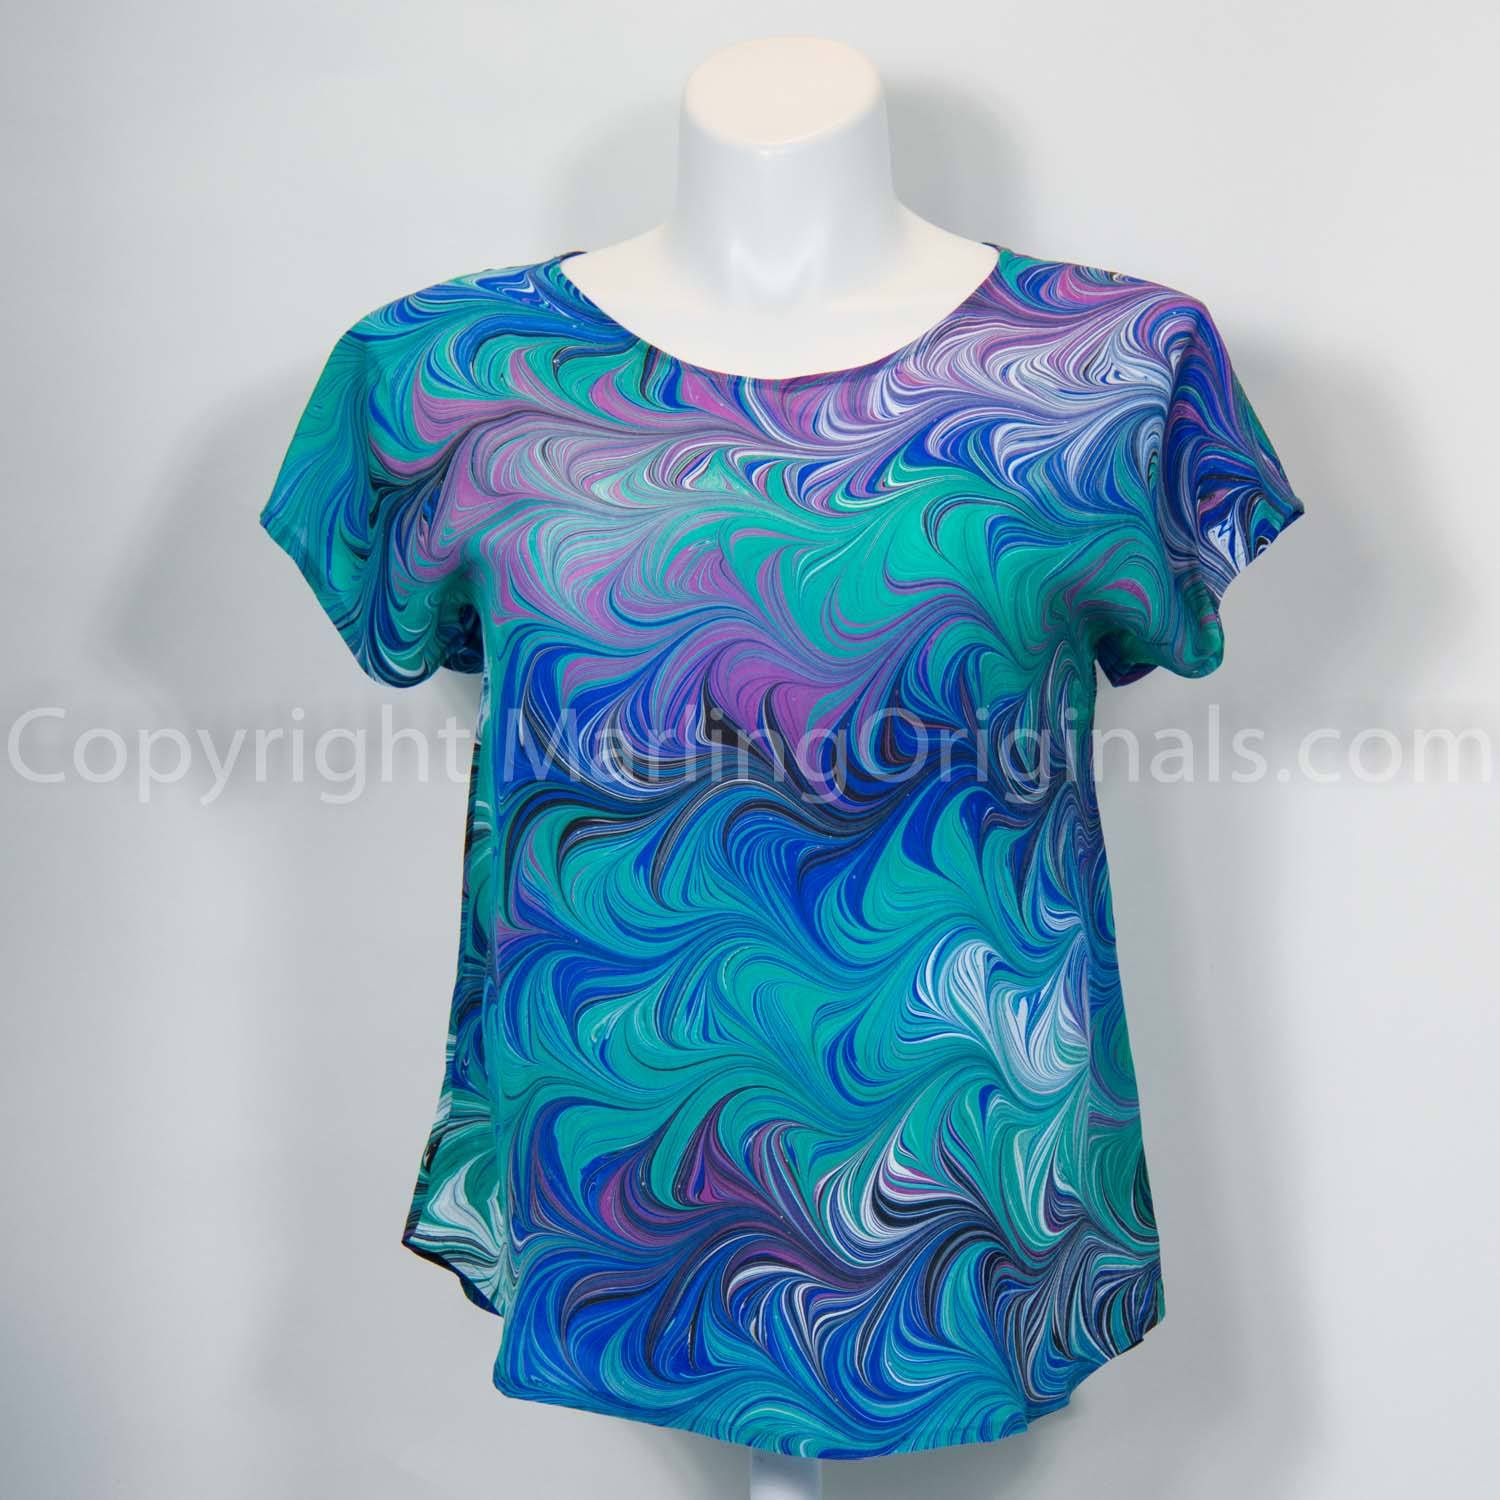 Hand marbled silk top in blue, green, violet and white.  Short sleeves, round neck, curved hem. 